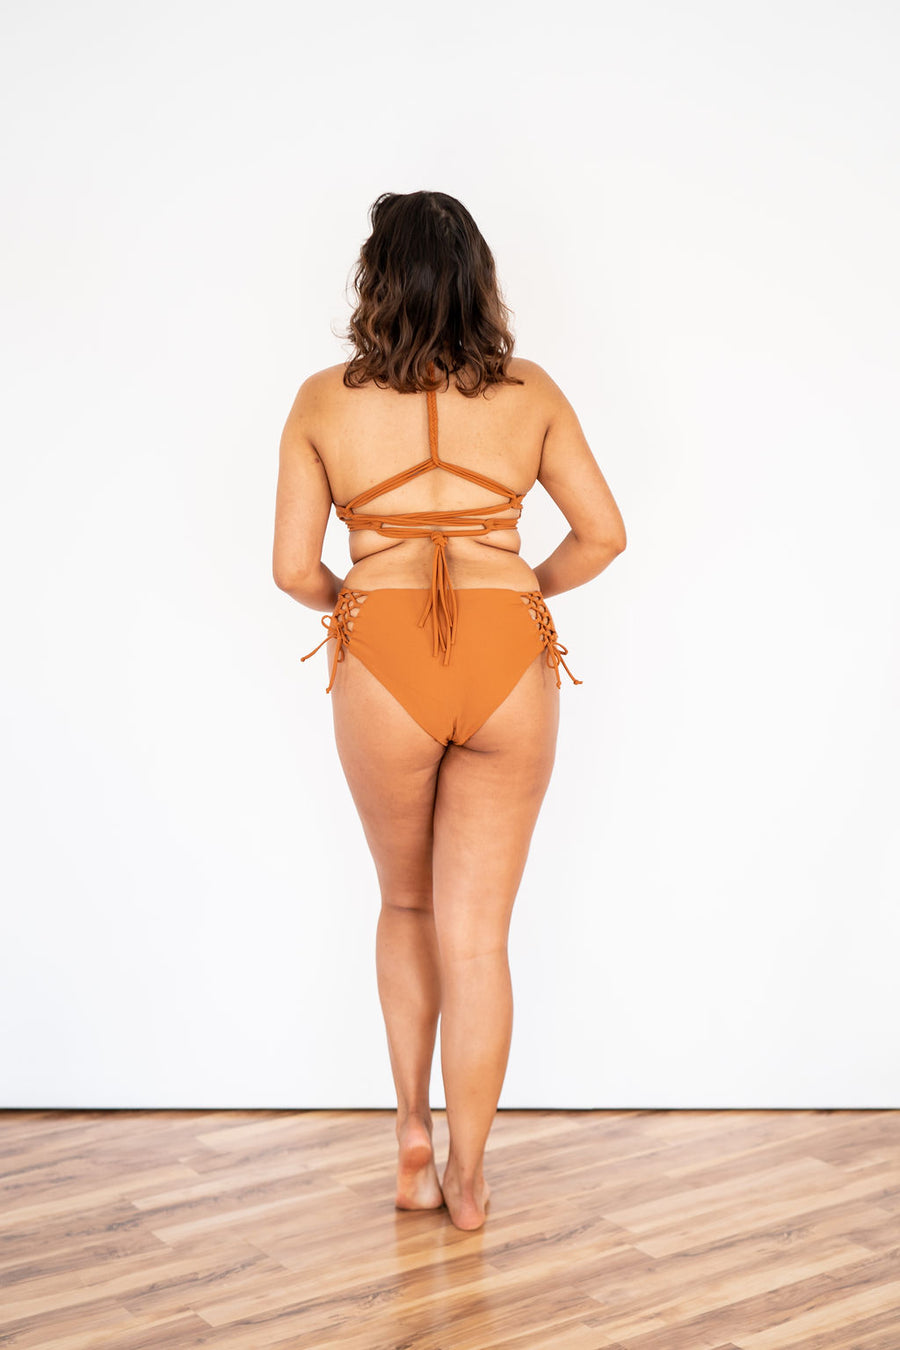 This Dallas Native Made a Bikini Designed for Smaller Busts - D